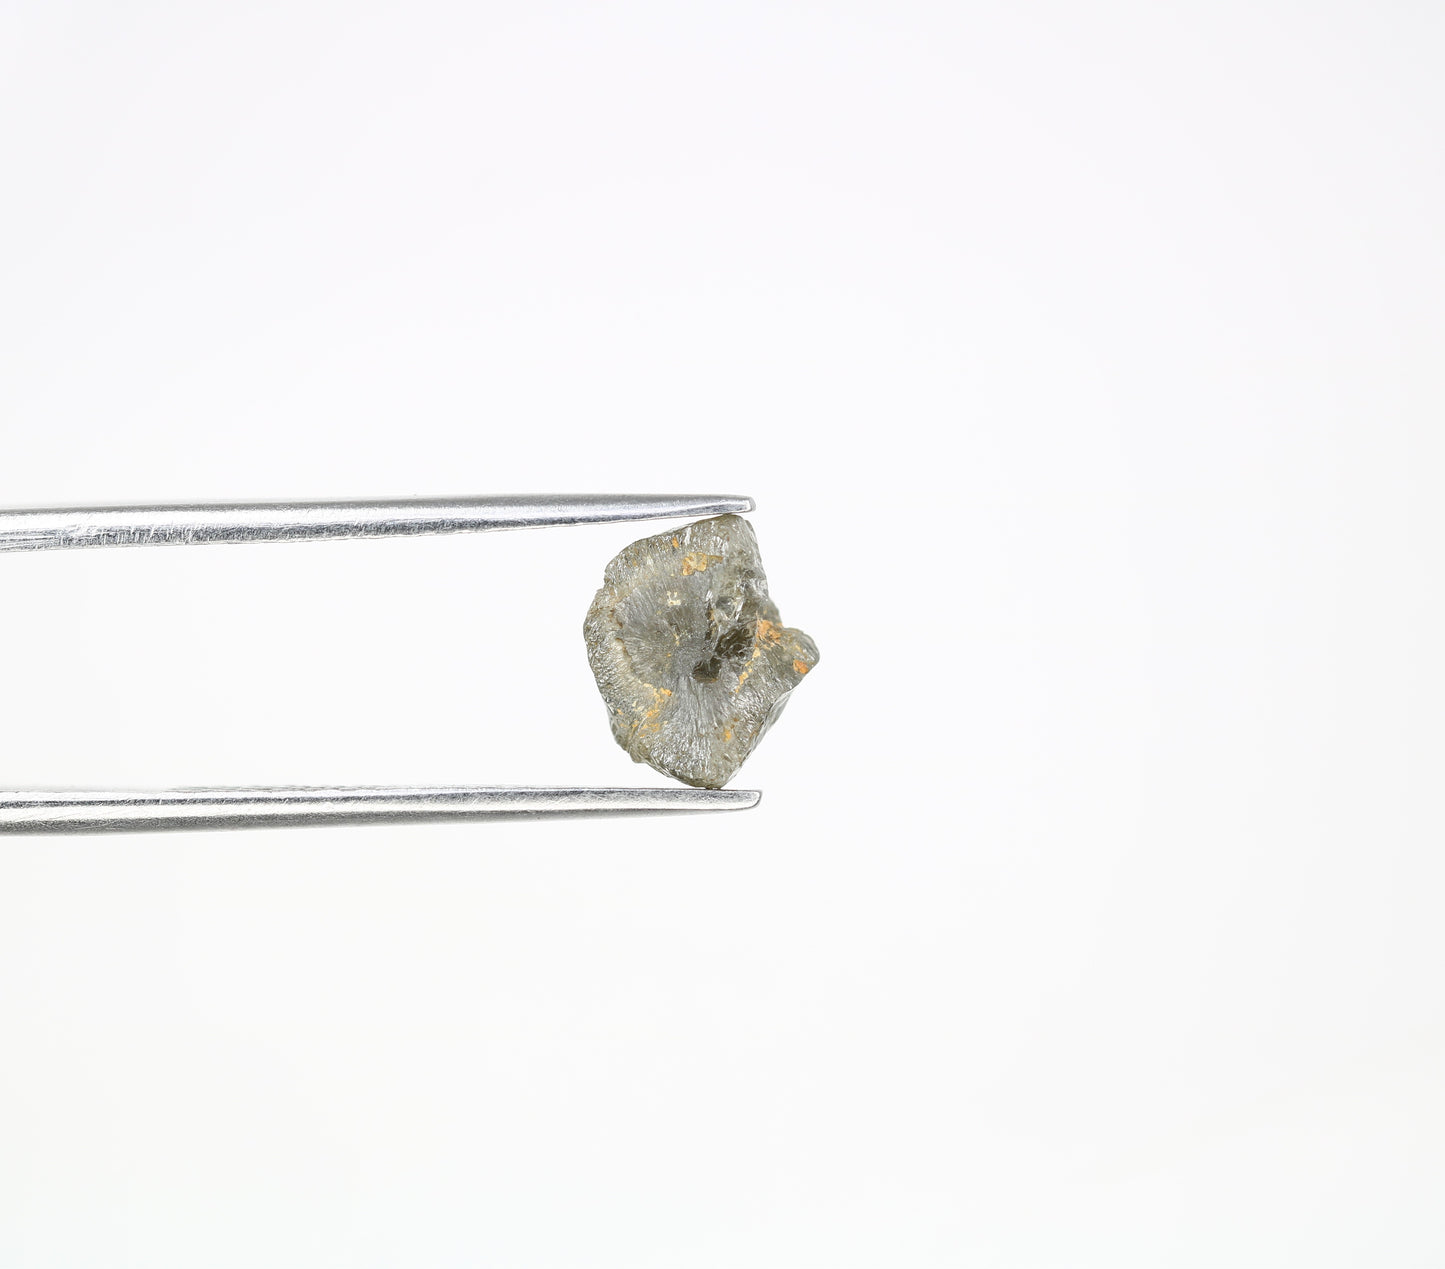 1.76 CT 8.40 MM Raw Uncut Rough Grey Diamond For Engagement Ring